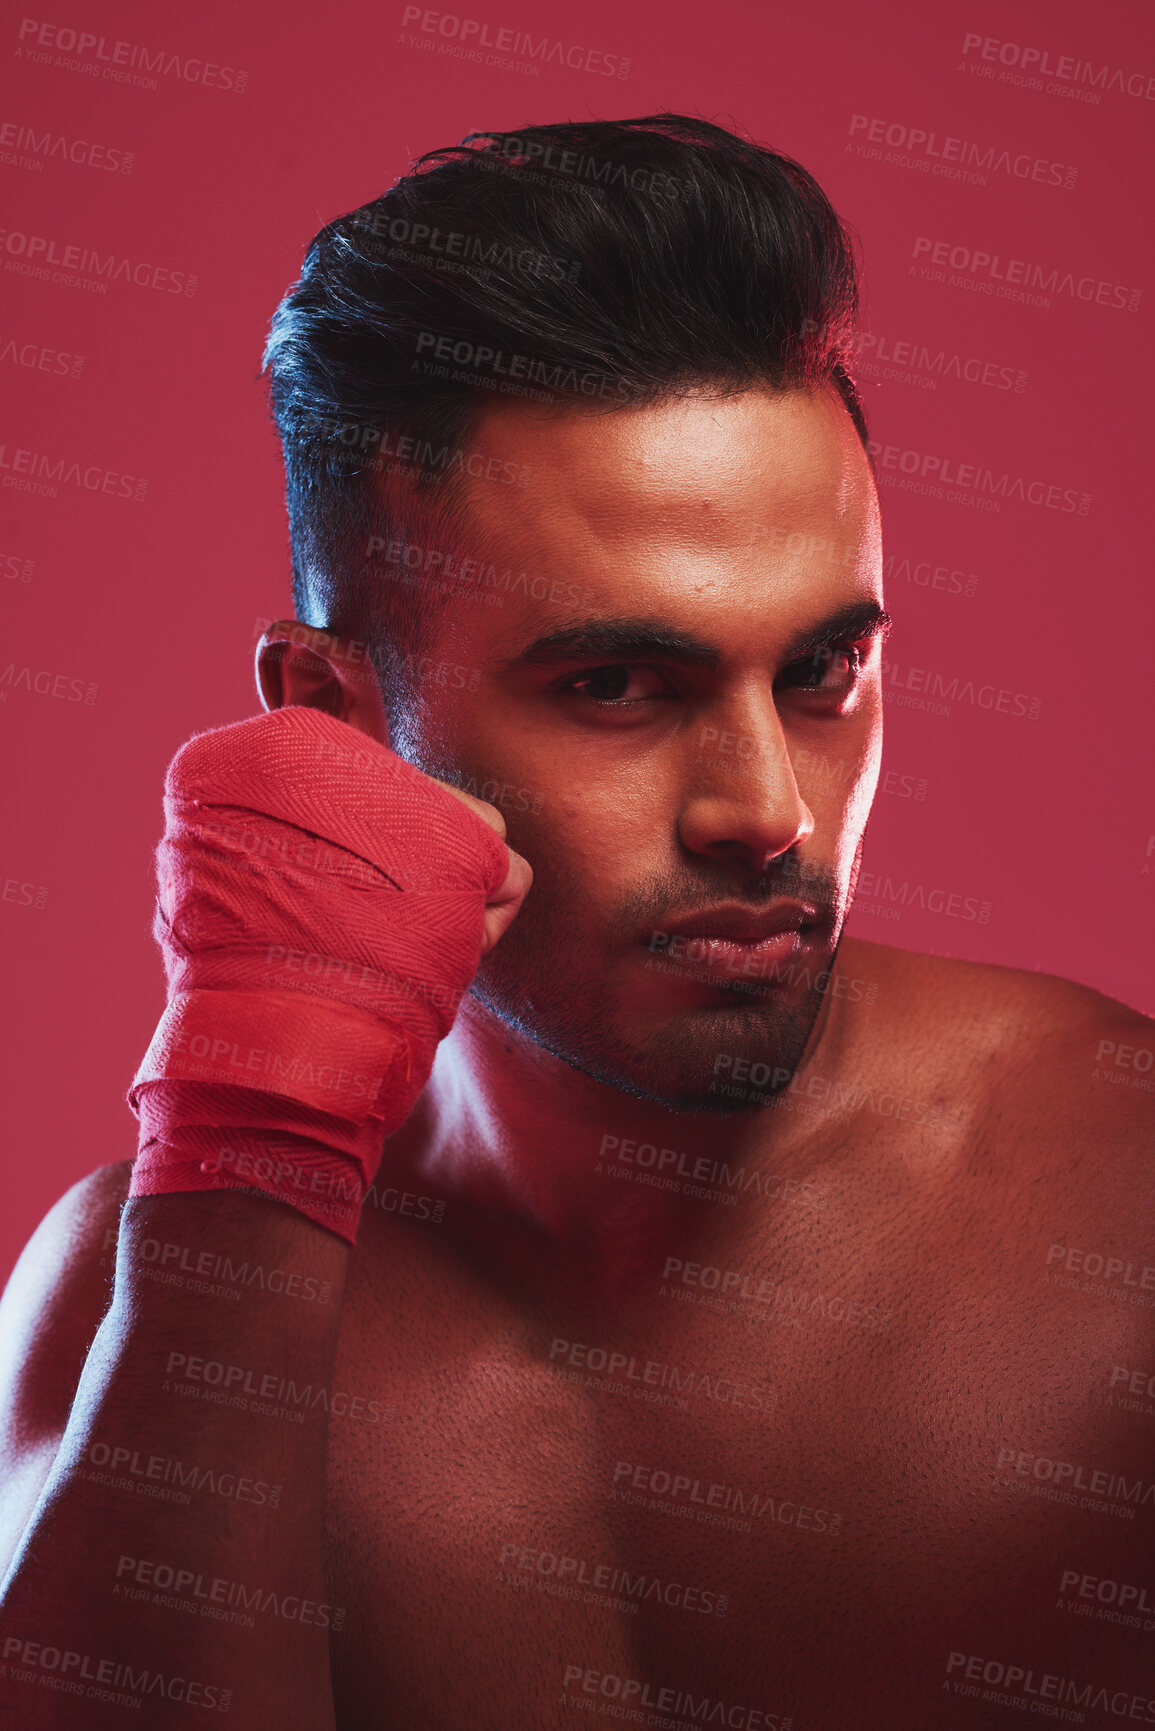 Buy stock photo Portrait of one fit and strong handsome mixed race kickboxer isolated against a red studio background and getting ready to fight. Hispanic man posing shirtless in a punching stance. Focused on target